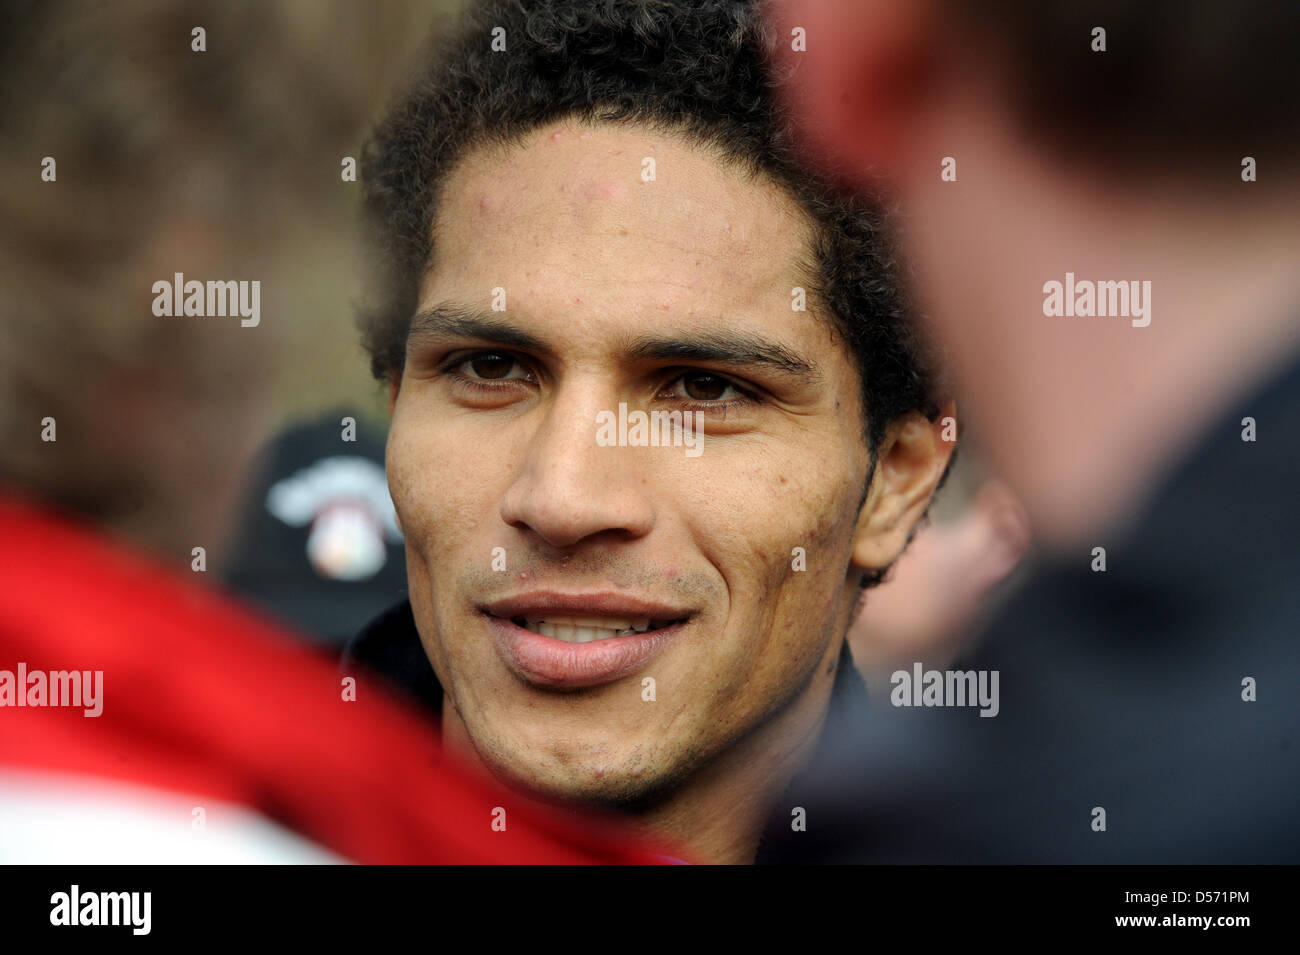 Hamburg's José Paolo Guerrero gives an interview after a training session of German Bundesliga soccer club SV Hamburg in Hamburg, Germany, 06 April 2010. After the goalless draw in the Bundesliga match against Hanover 96 on 04 April 2010, Guerrero threw a drinking bottle in a fan's face who had provoked him before. Guerrero could be suspended by the German Football Association DFB. Stock Photo